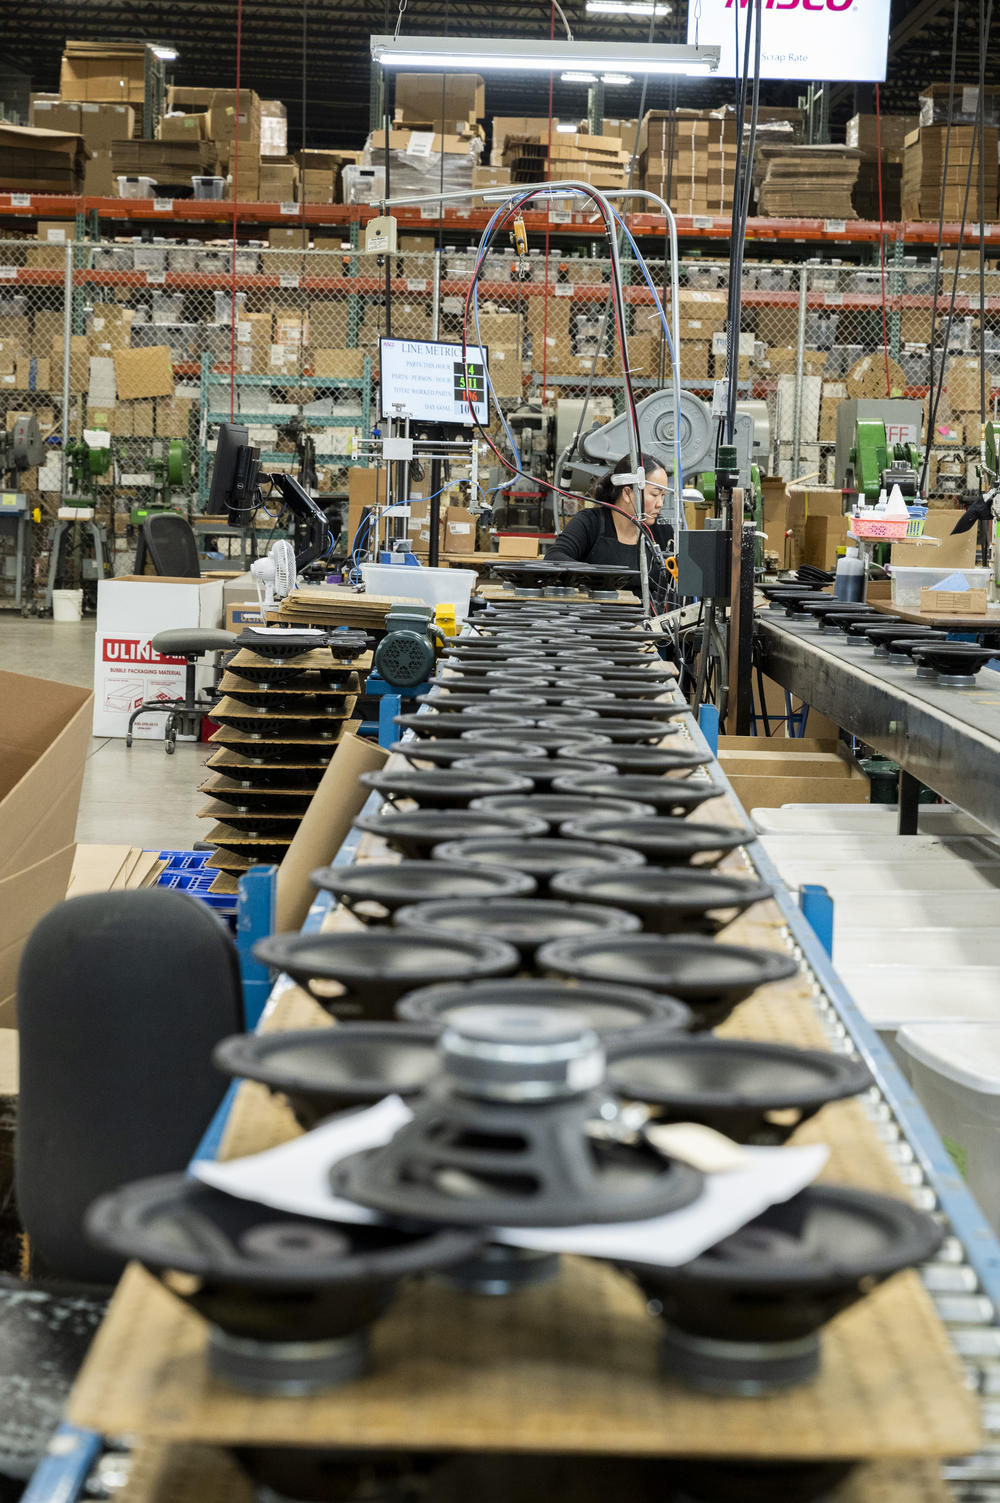 Speakers on the assembly line at the MISCO factory in St. Paul, Minn. on May 18, 2023.